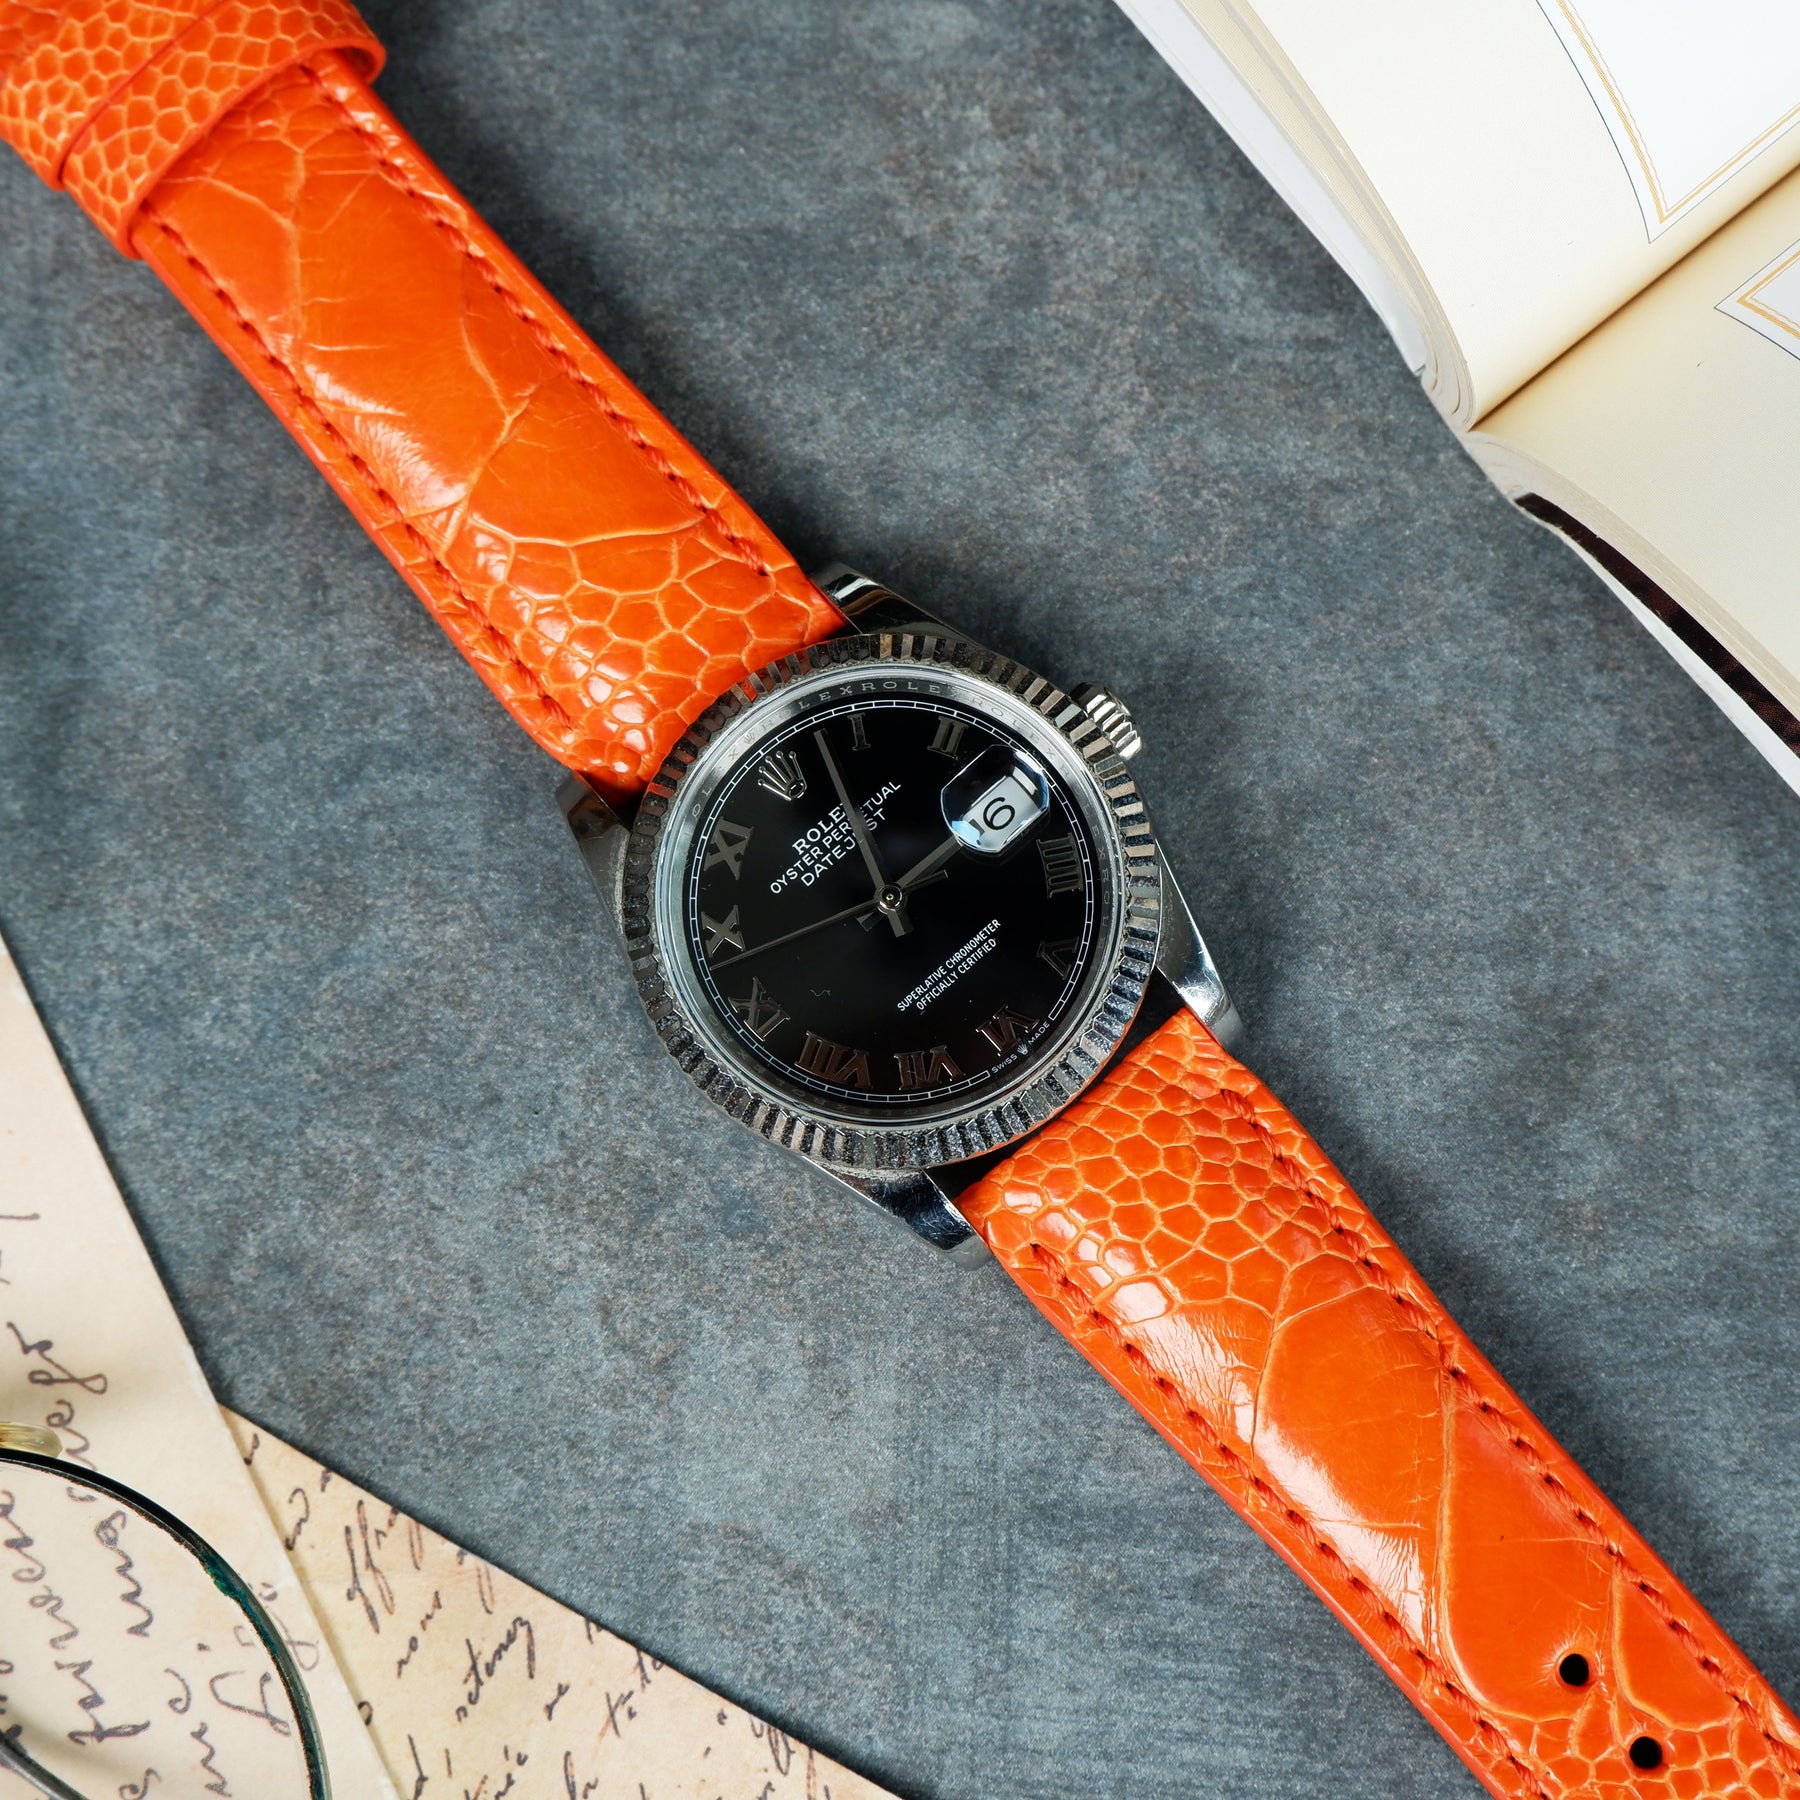 Ostrich legs leather watch straps/ Orange color/ handmade to order in  Finland